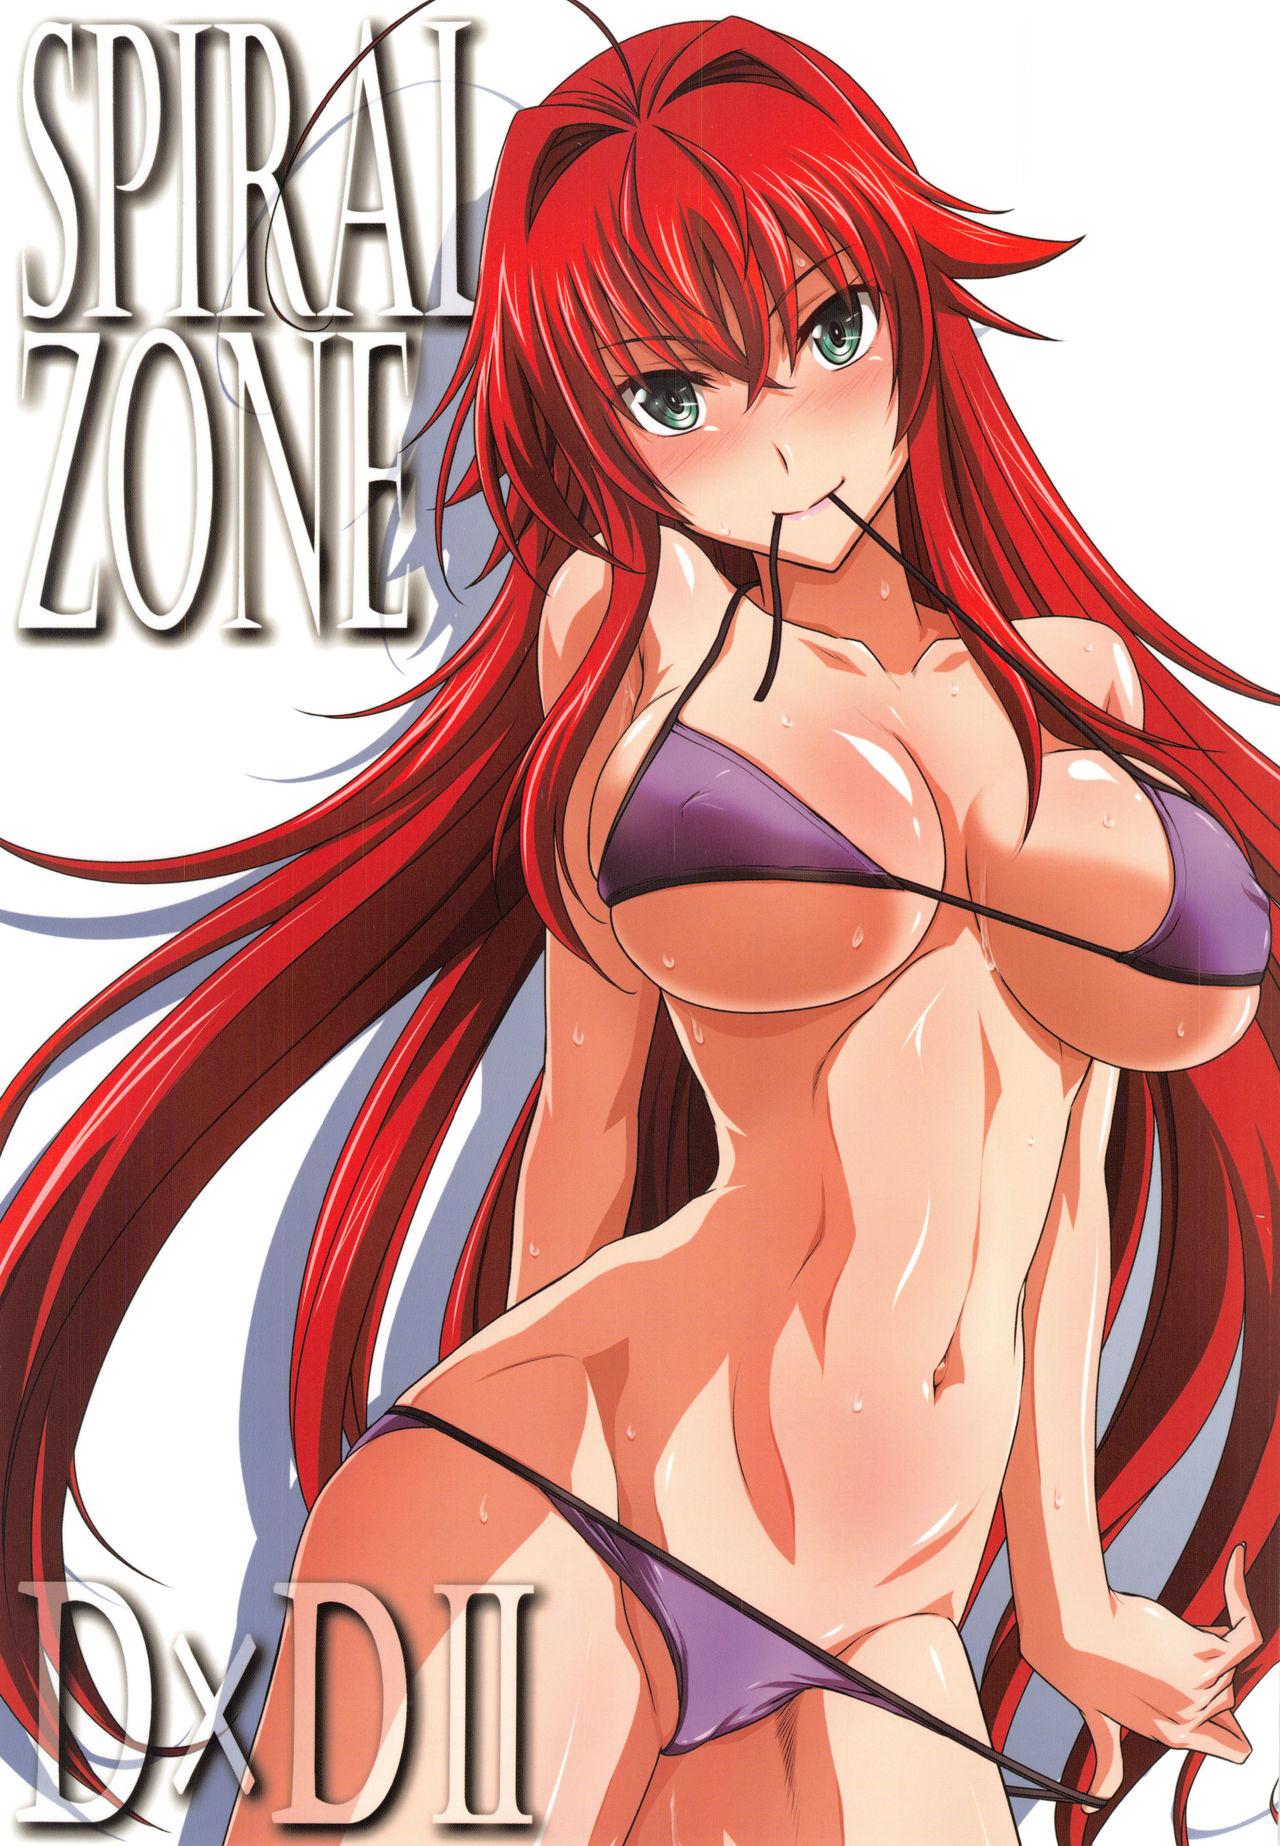 Gang Bang SPIRAL ZONE DxD II - Highschool dxd Stepbrother - Page 1